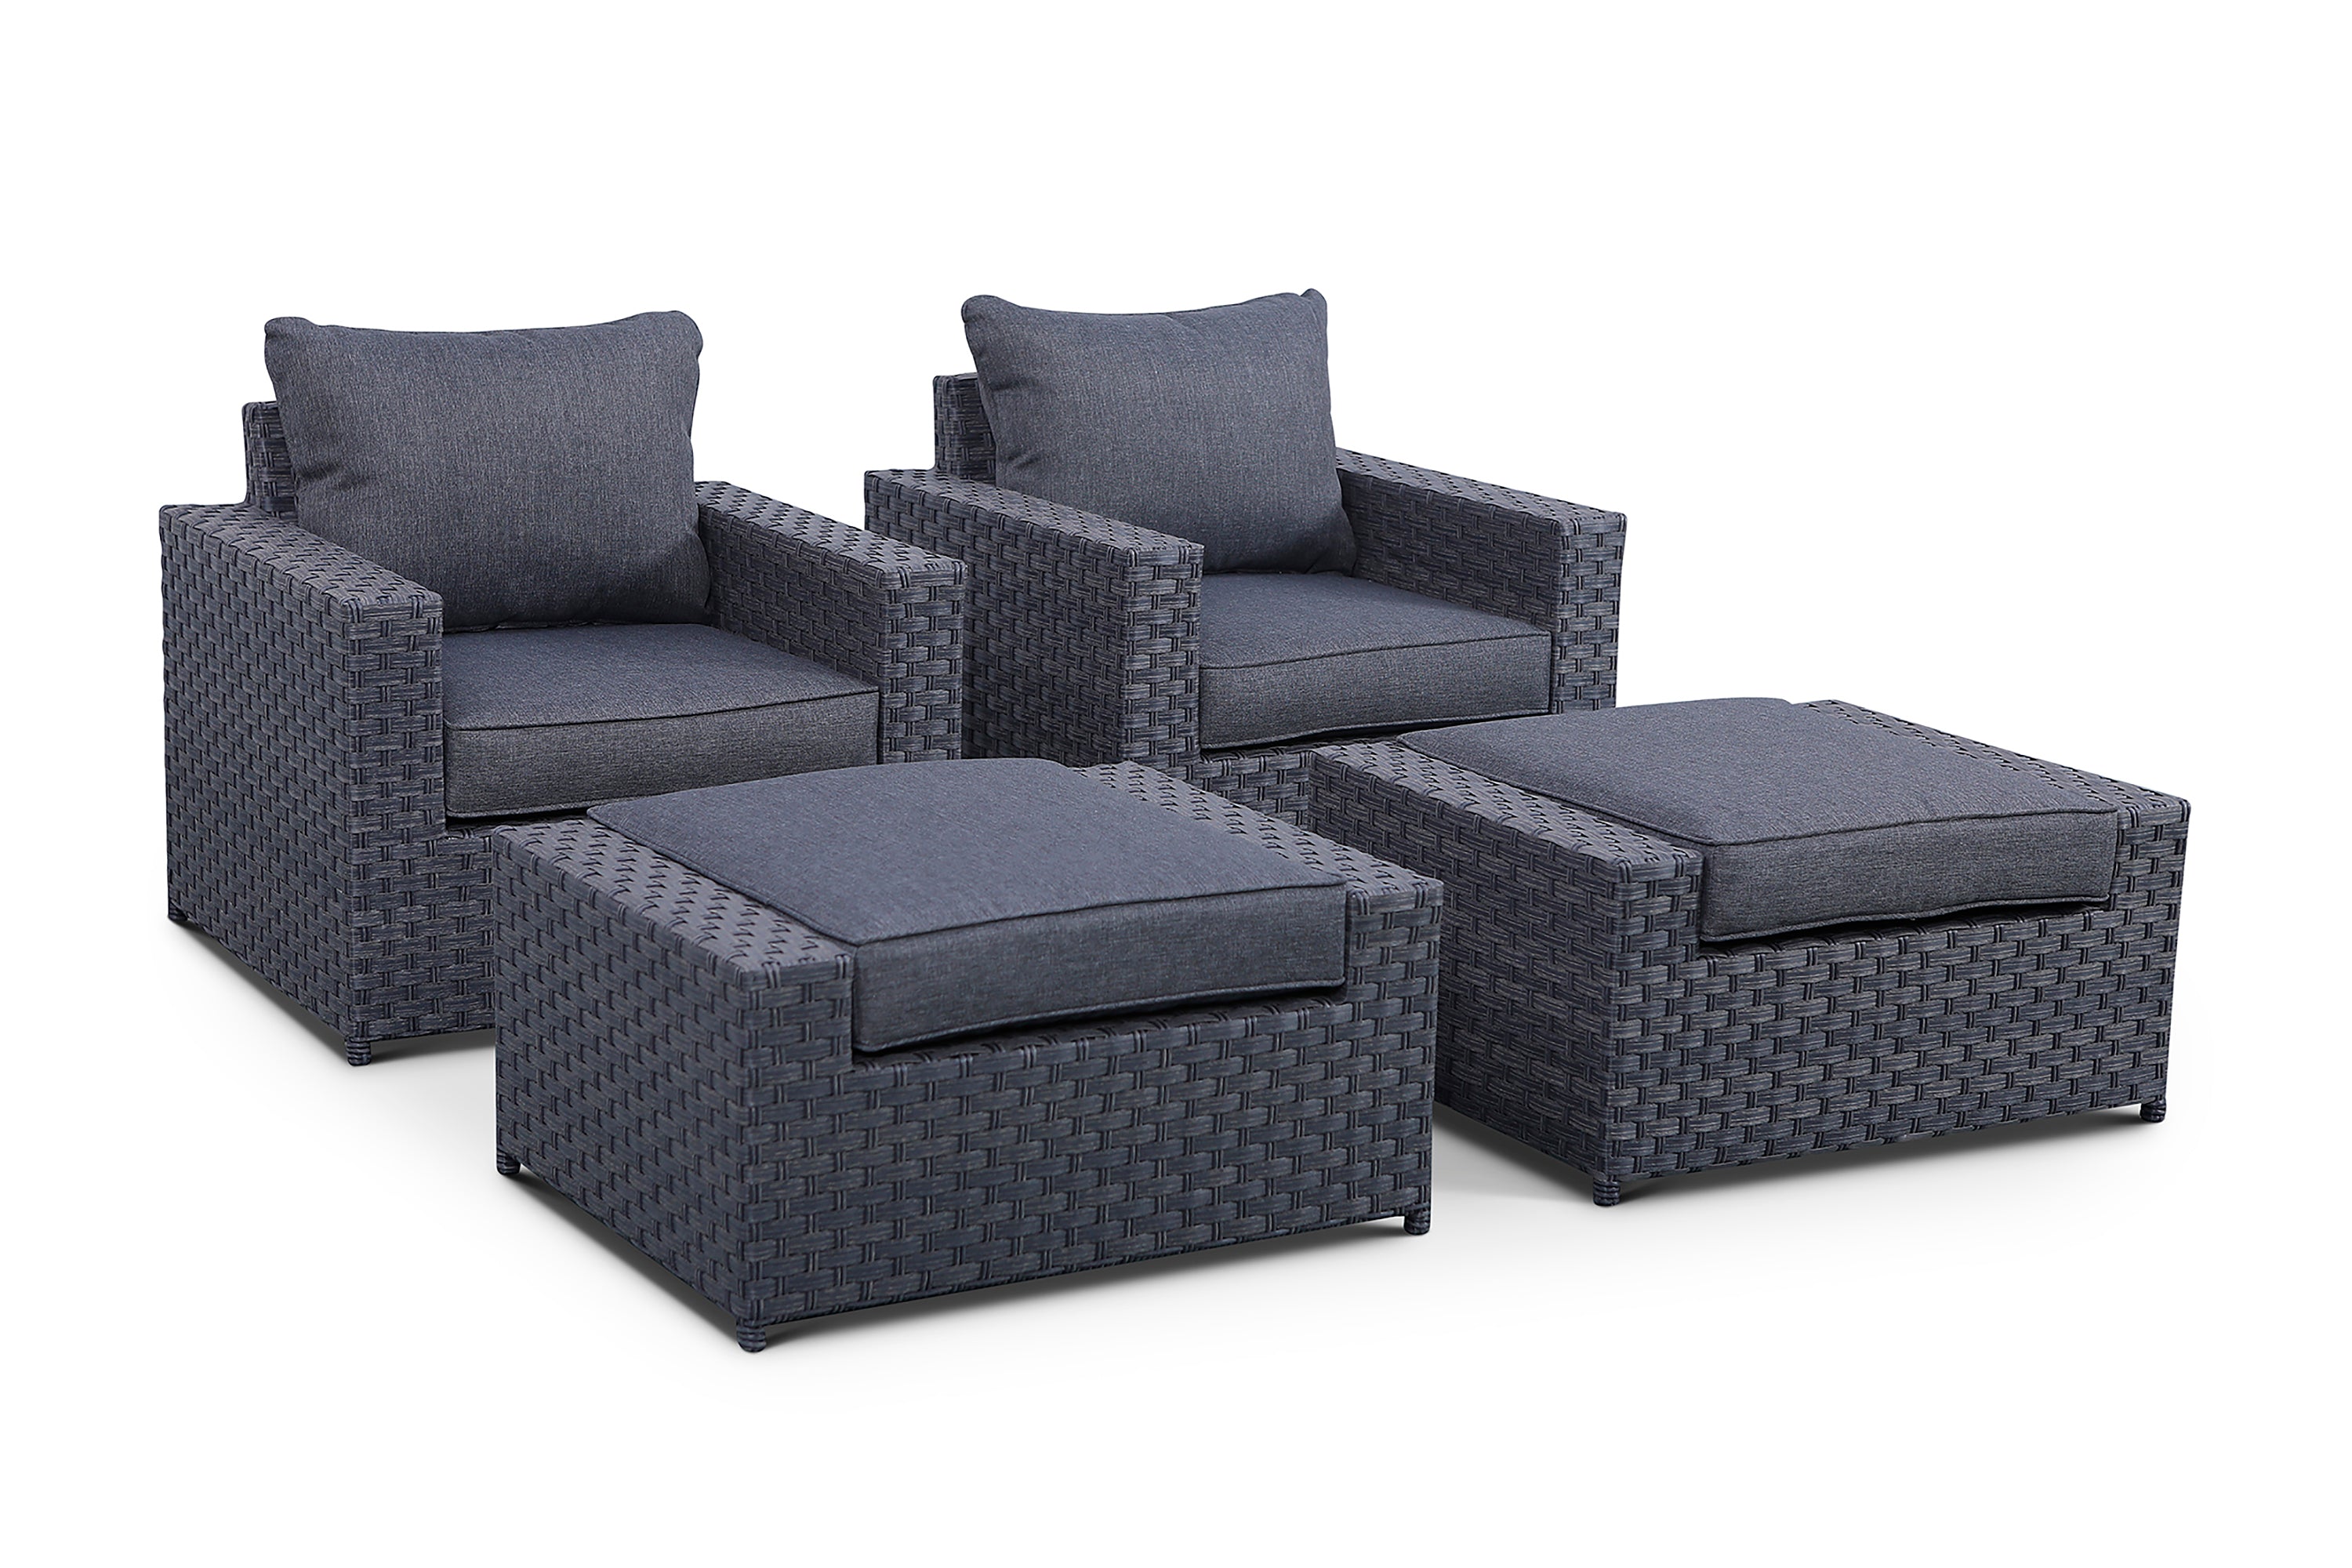 Cromwell 4 Piece Club Chair and Ottoman Set